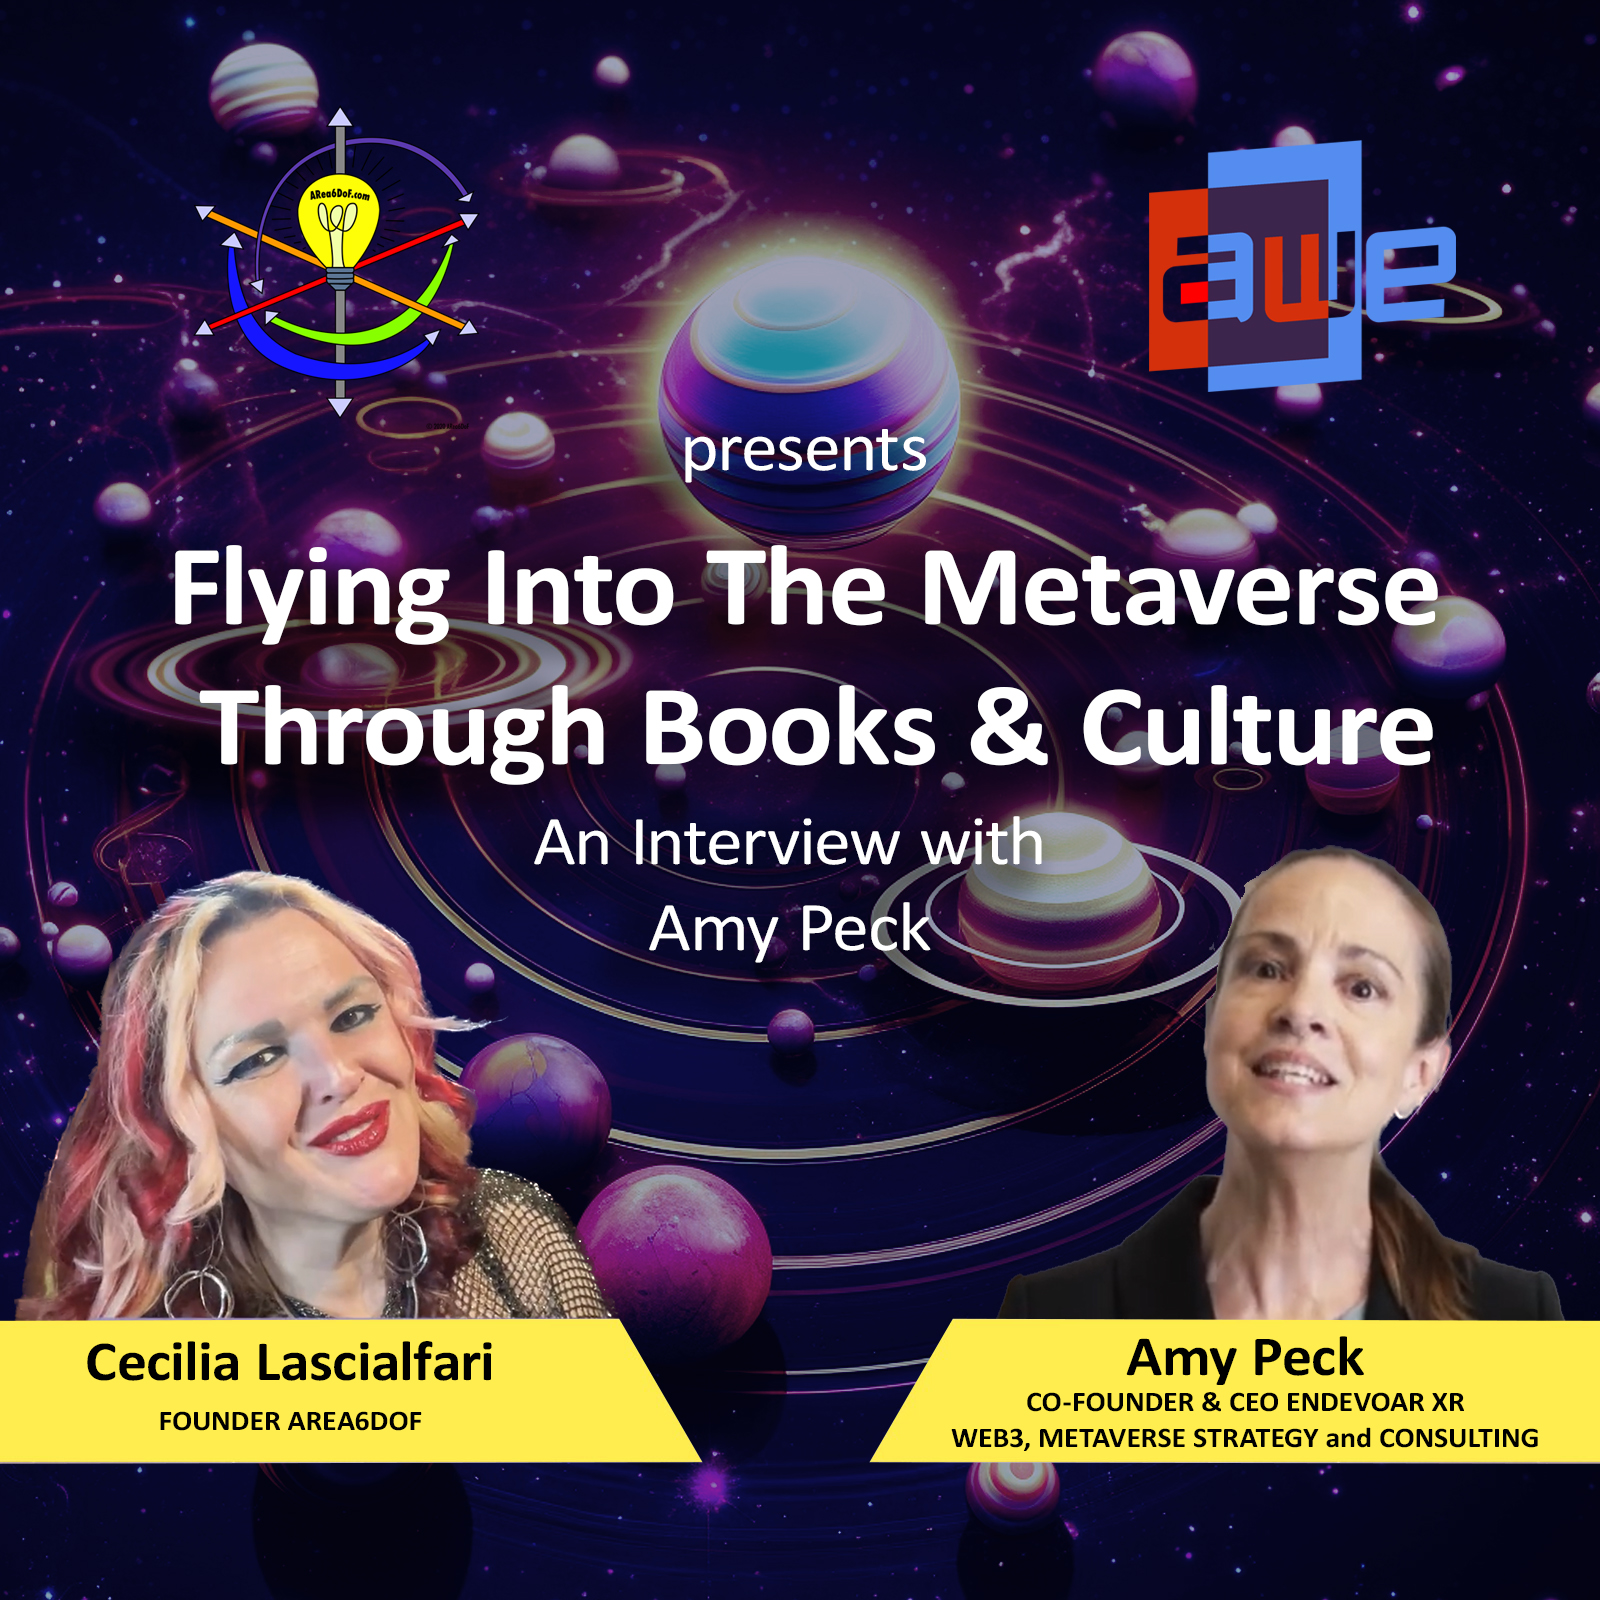 AMY PECK at “Flying Into The Metaverse Through Books & Culture” – ENDEAVORXR